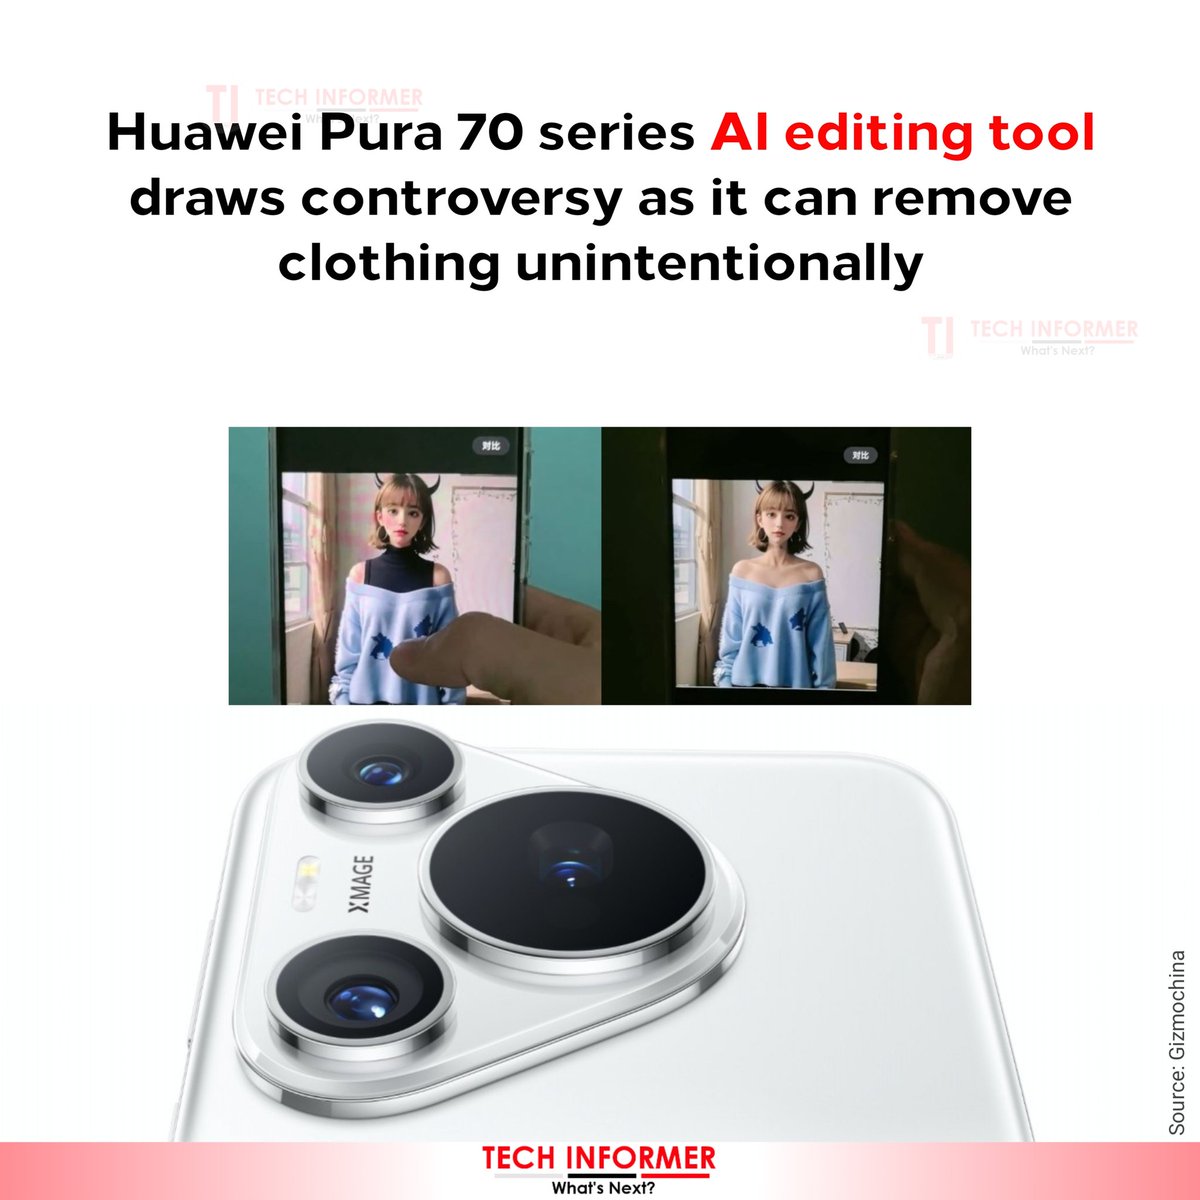 Huawei‘s latest Pura 70 series features an object removal function powered by AI. But it has come under fire as the feature can inadvertently erase parts of people’s clothing.
#Techinformer